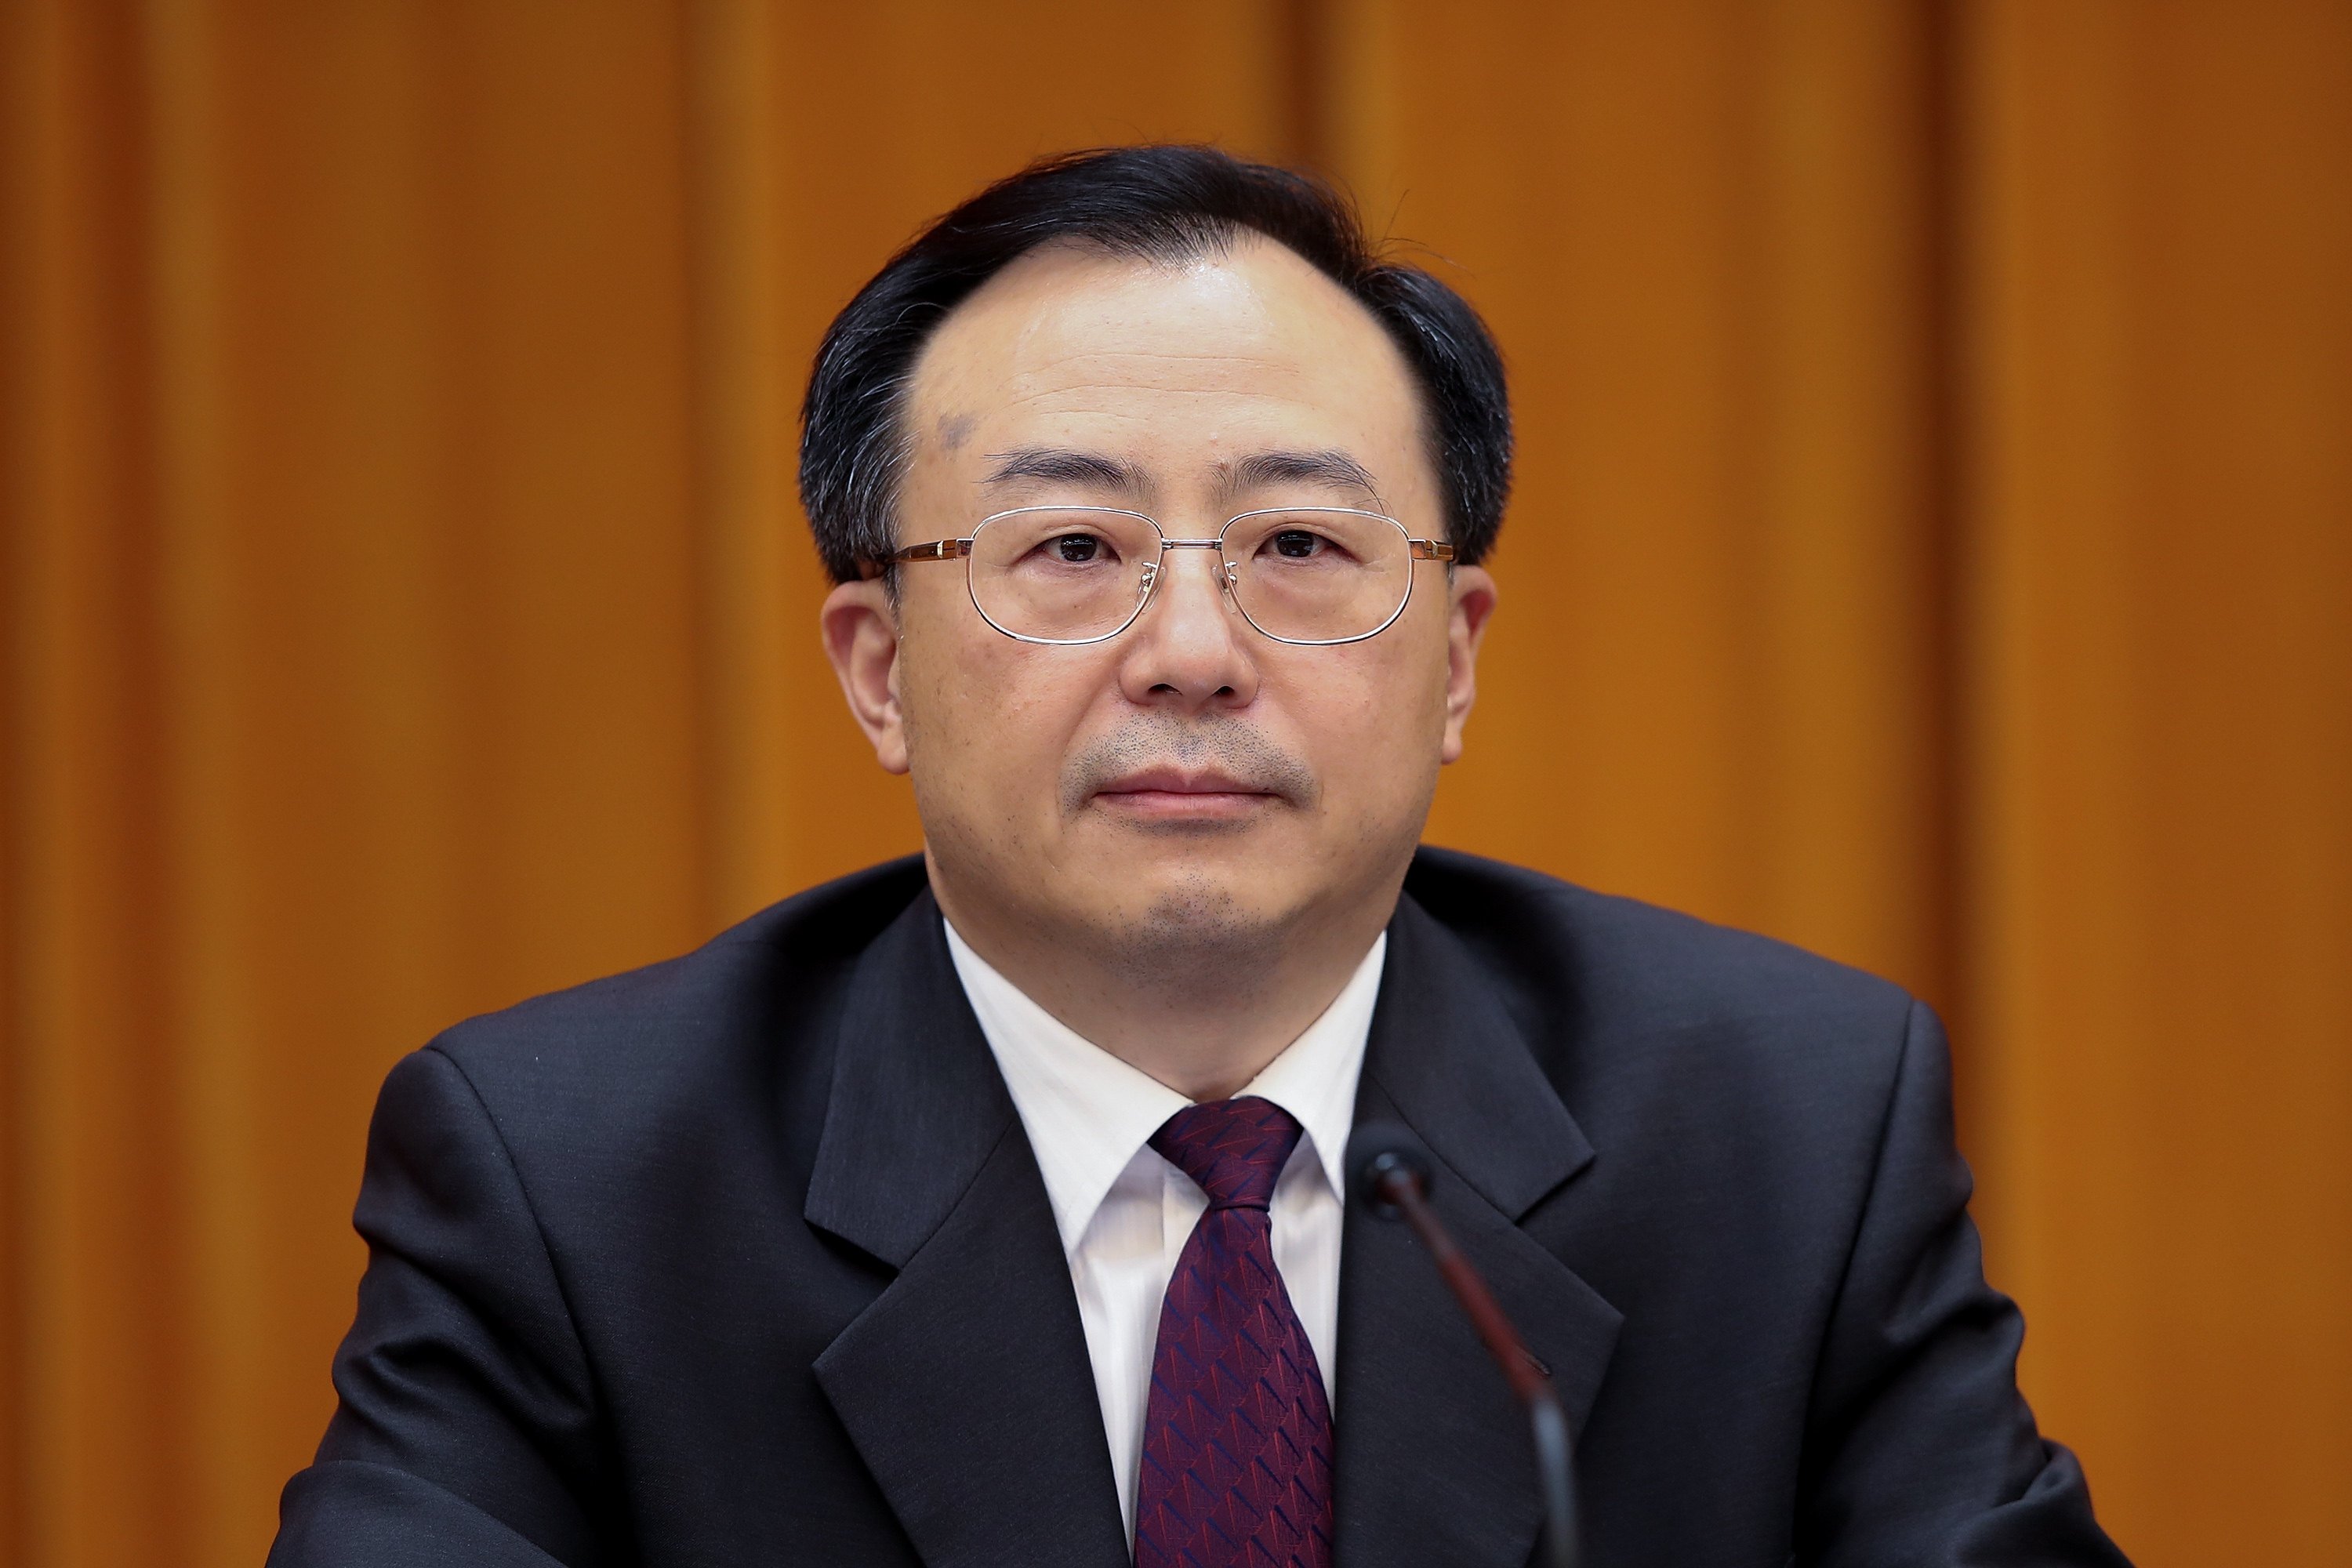 Wu Zhenglong, who has been named a state councillor and secretary general of the State Council, was previously party chief of Jiangsu province from September 2021.  Photo: Getty Images